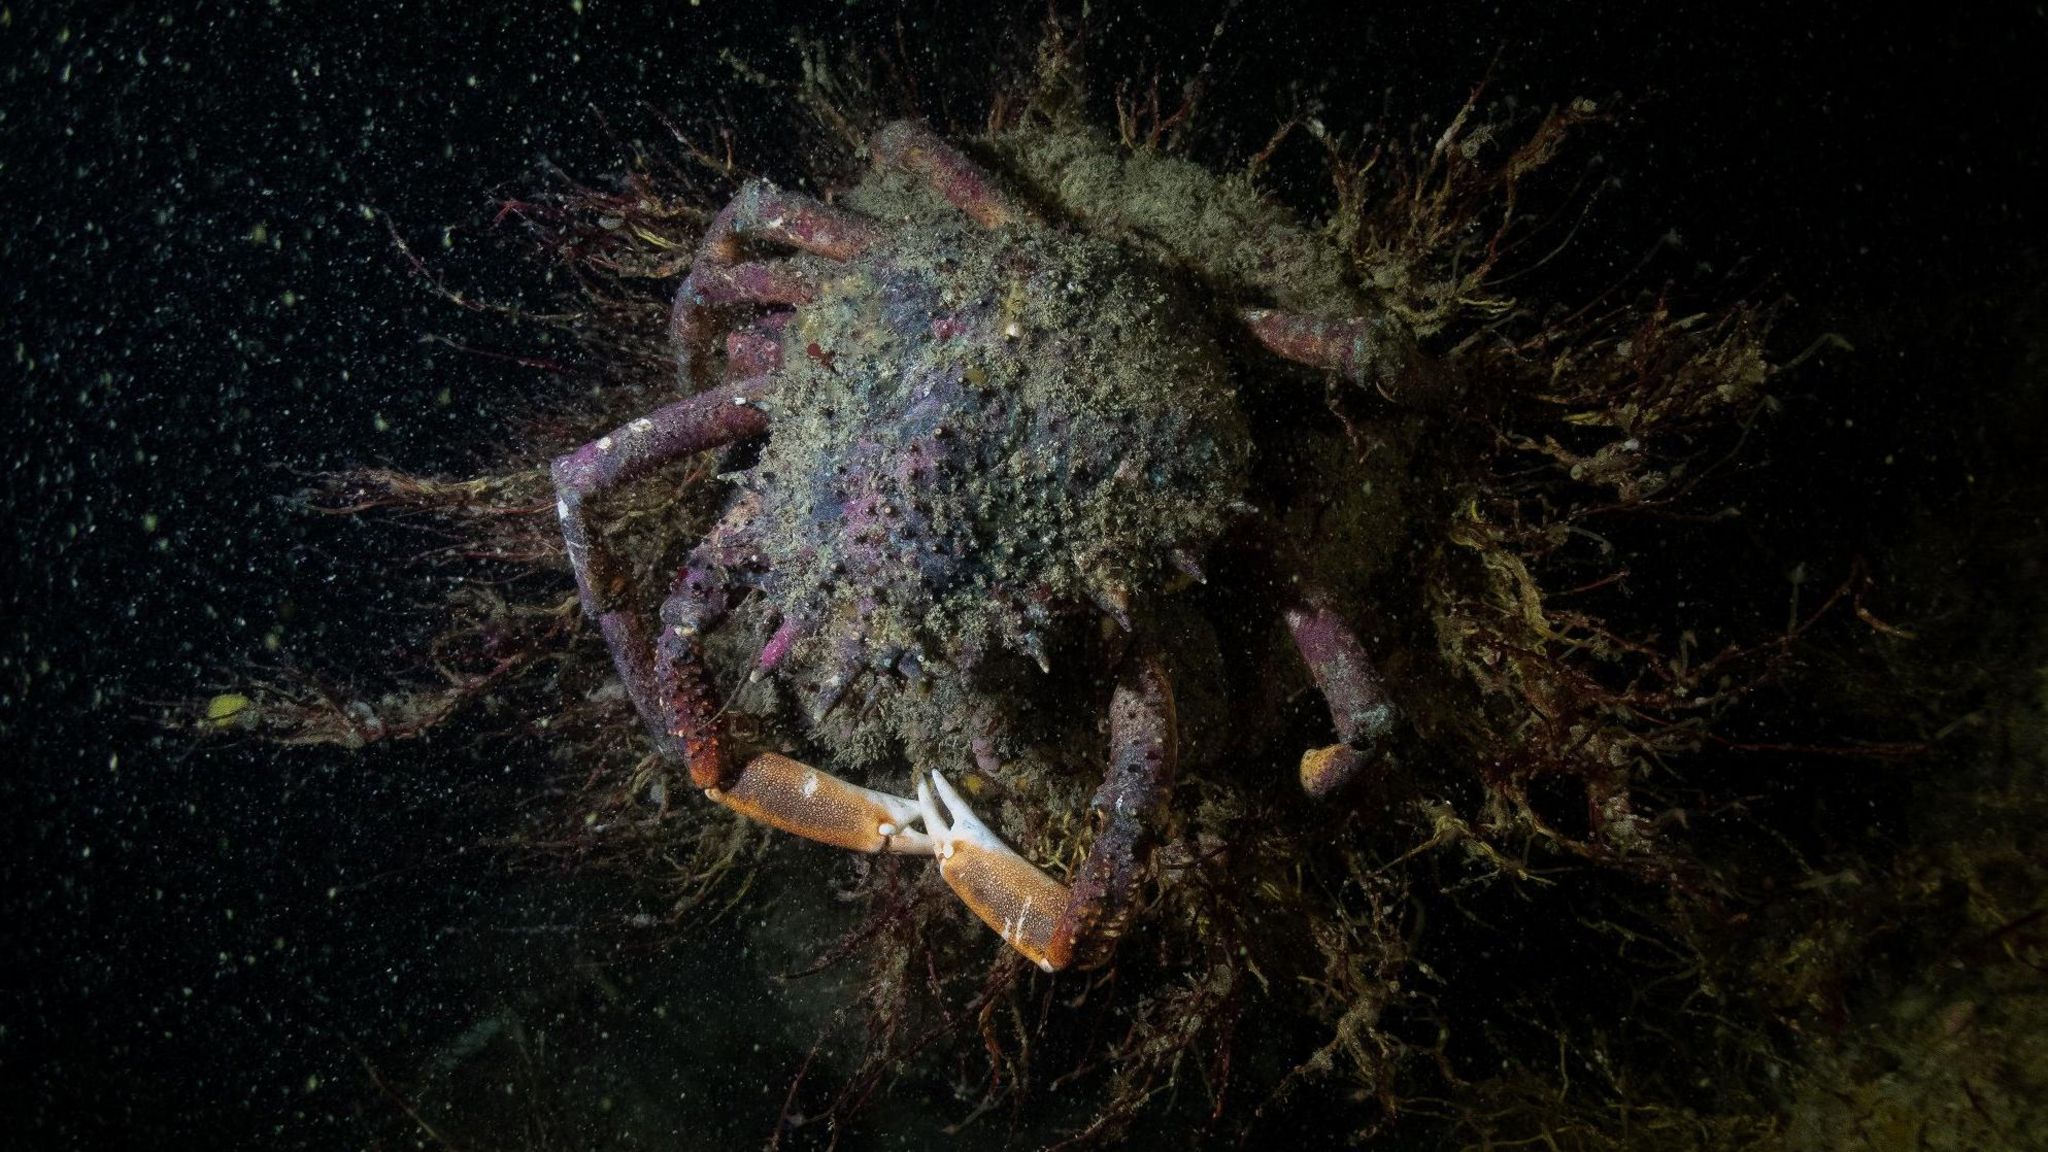 A photograph of a spider crab